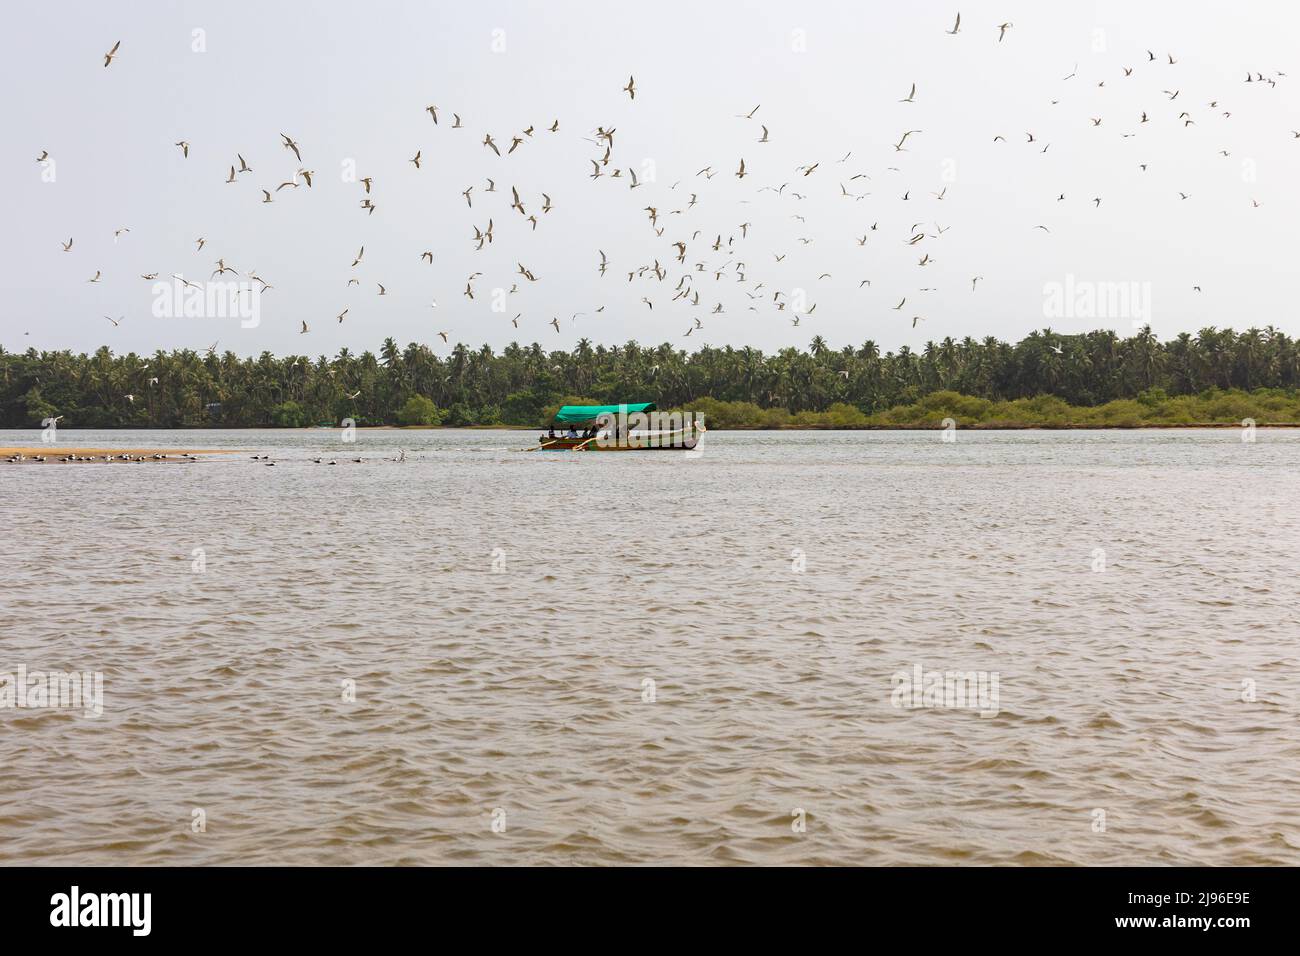 Flock of River Terns ( Sterna aurantia ) flying over a boat carrying tourists on Karli River Stock Photo